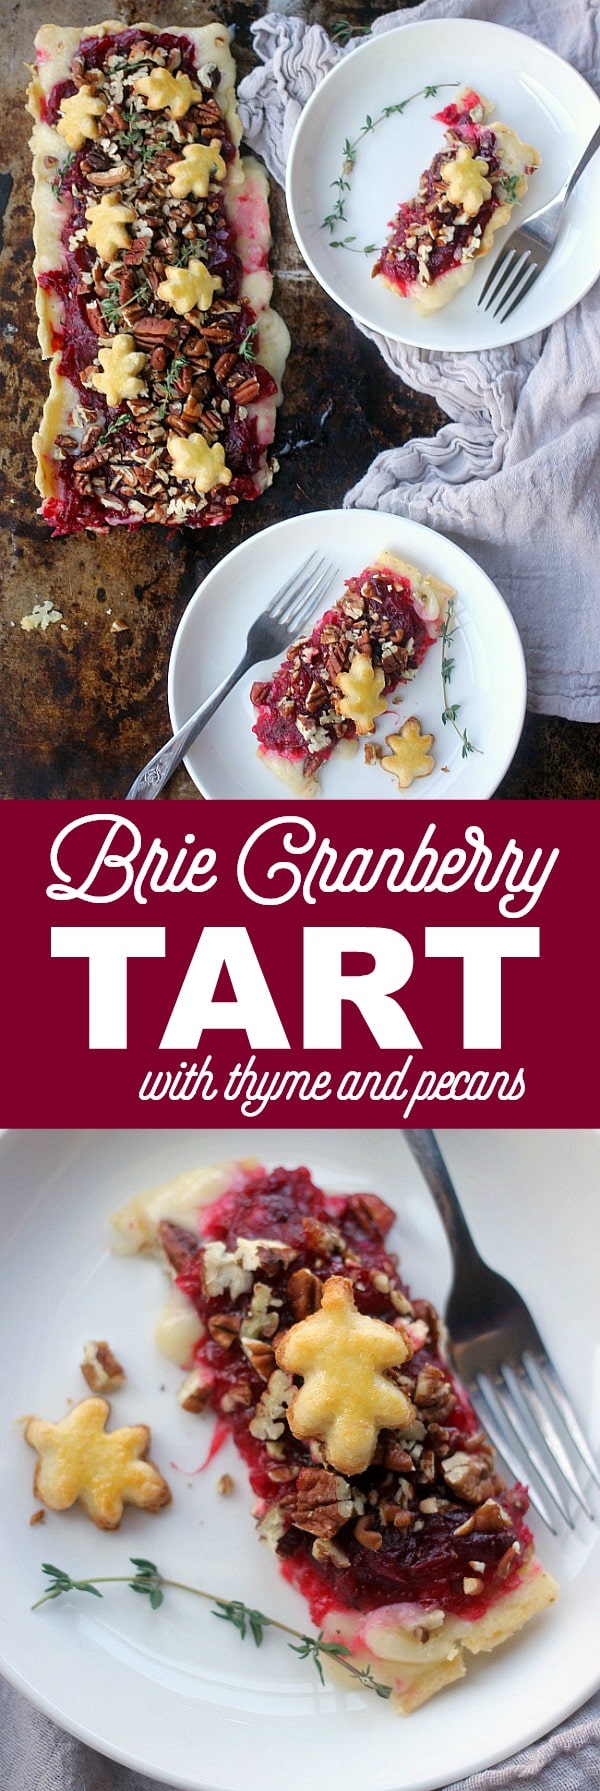 This Brie Cranberry Tart with Thyme and Pecans is a unique take on a Brie en Croute! Serve this as an appetizer or a dessert to your holiday meal. It is sure to impress a crowd.  